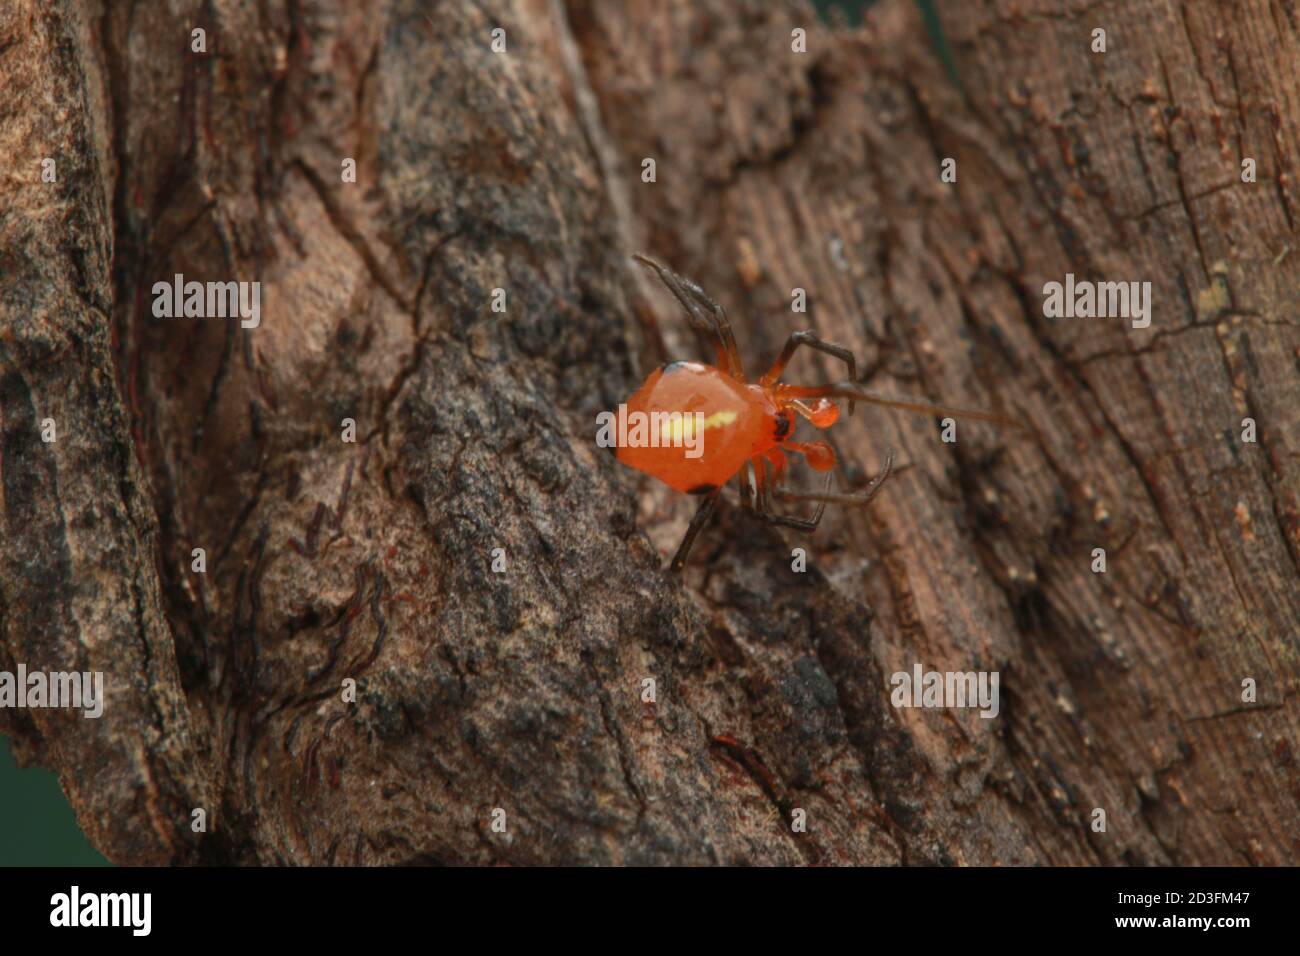 Comb-footed Spider, probably Argyrodes Stock Photo